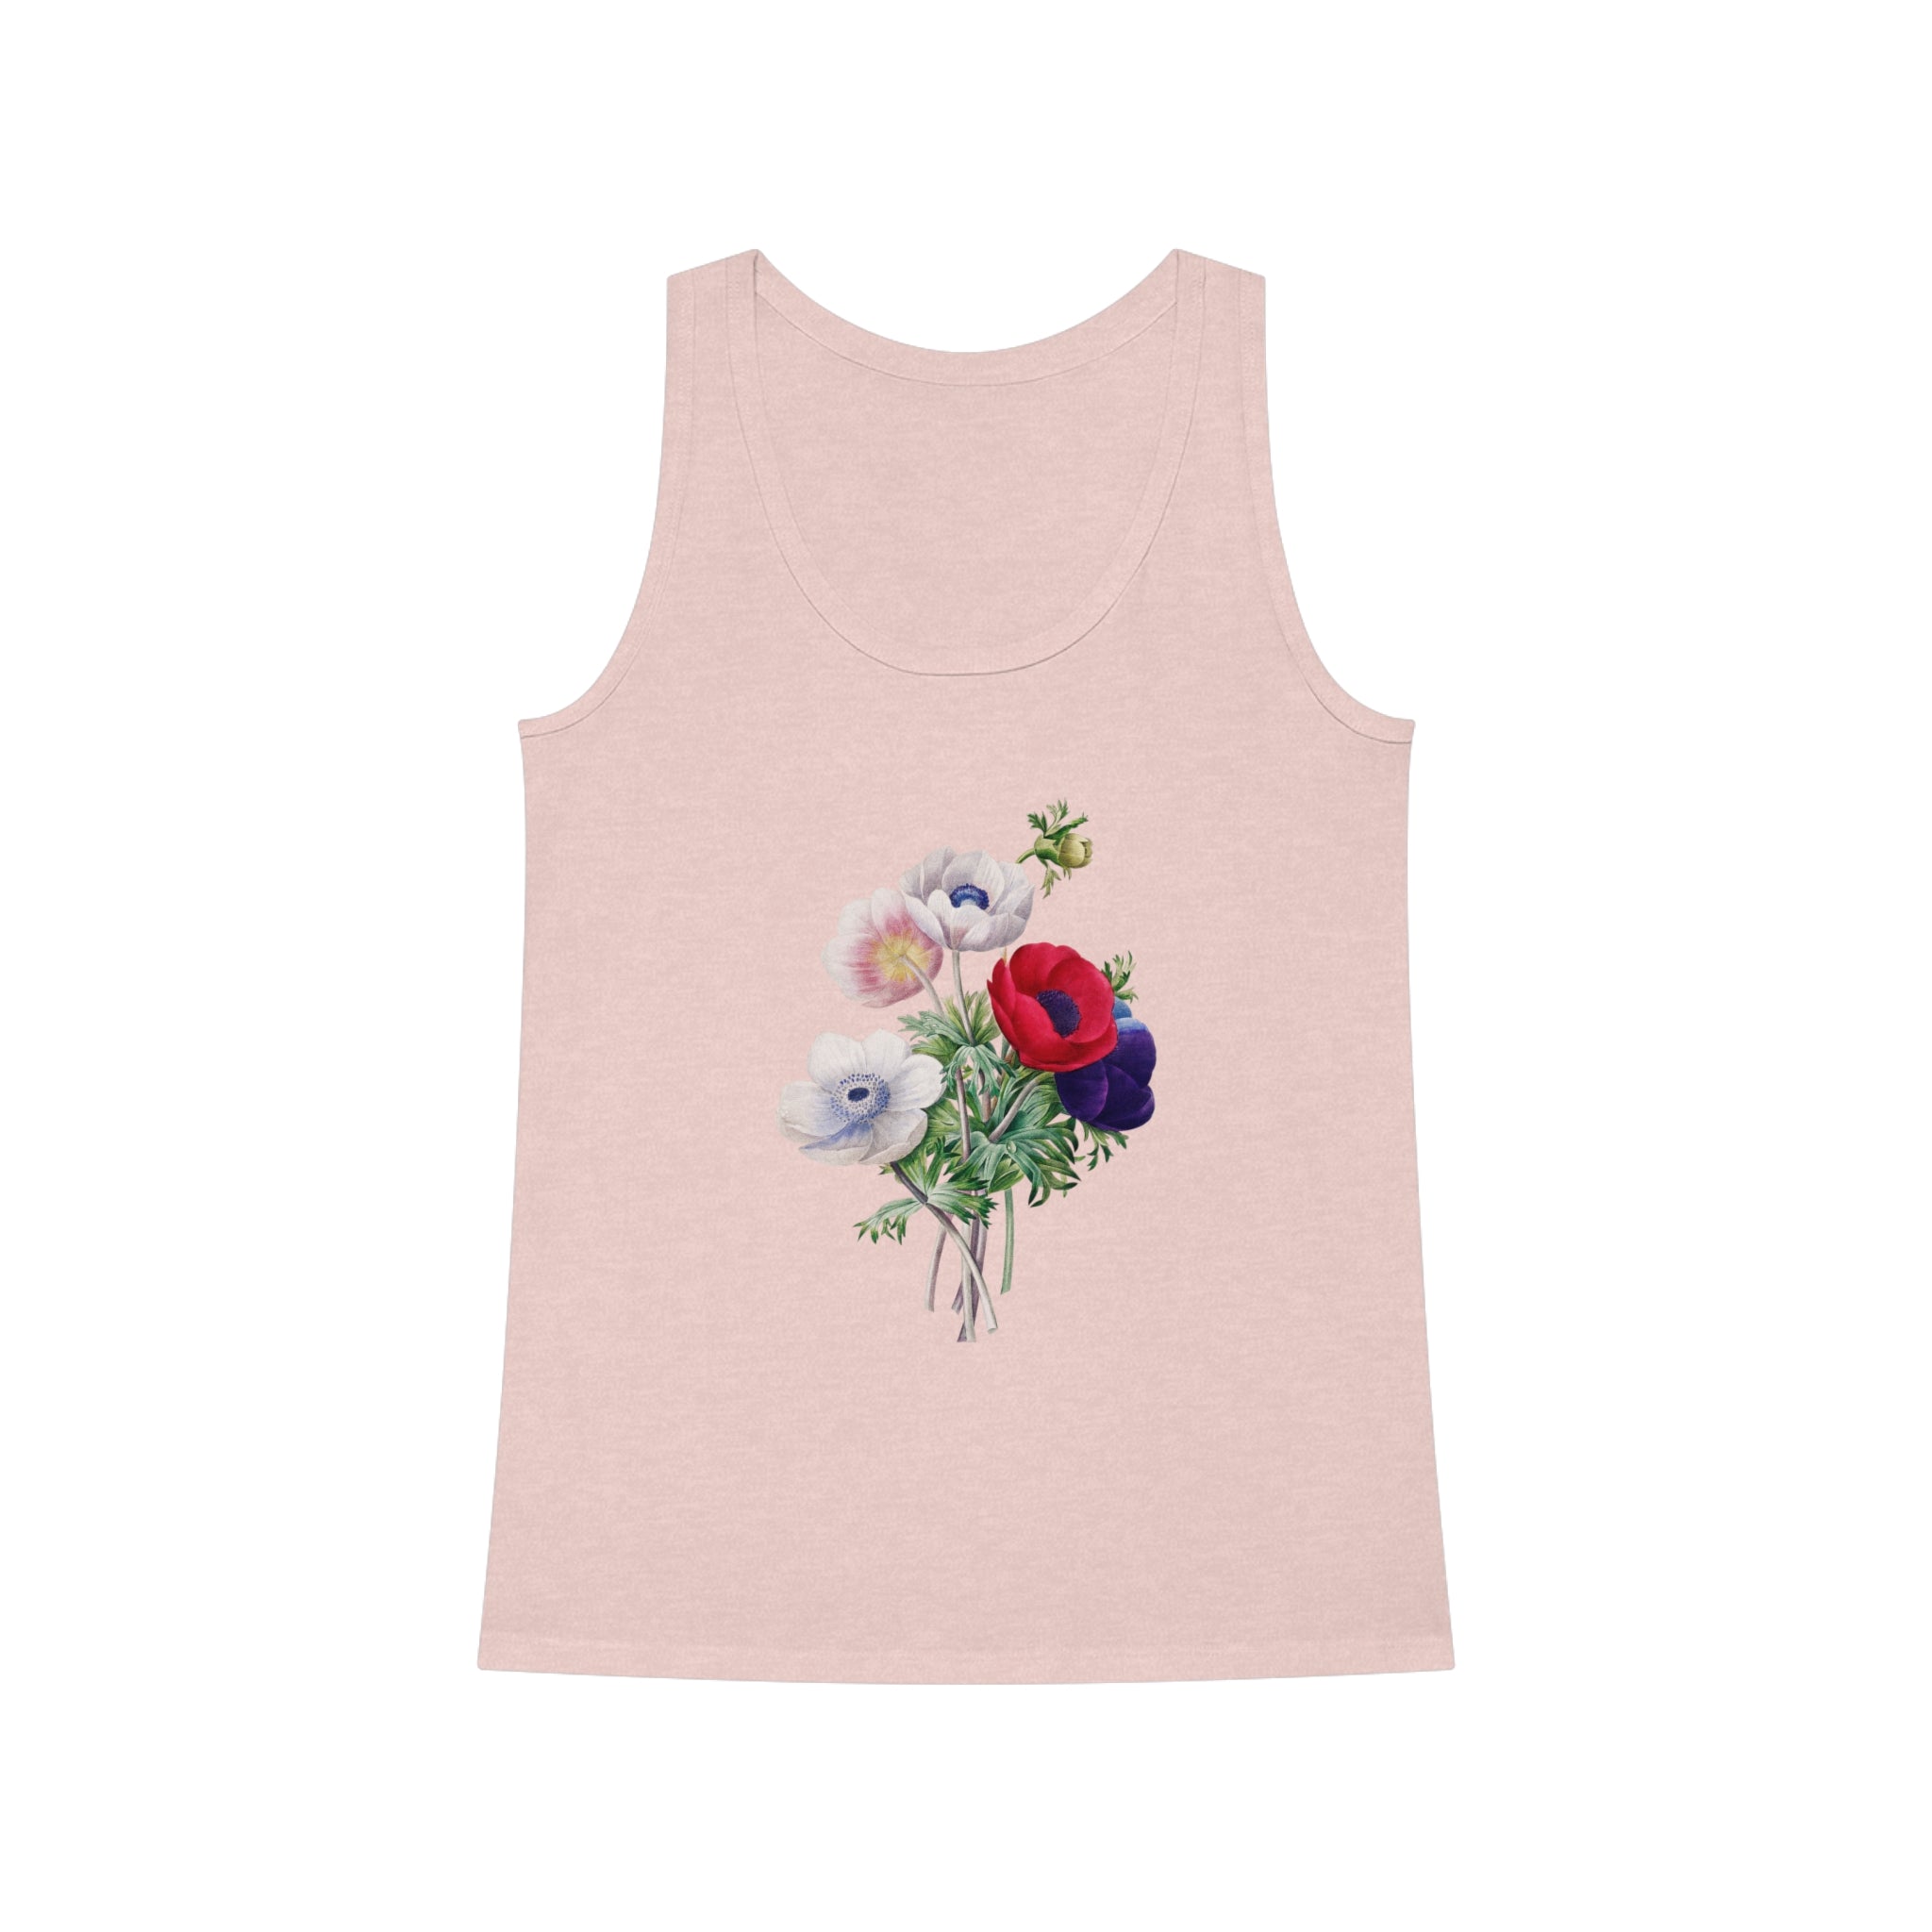 An Anemones Tank Top with flowers on it.